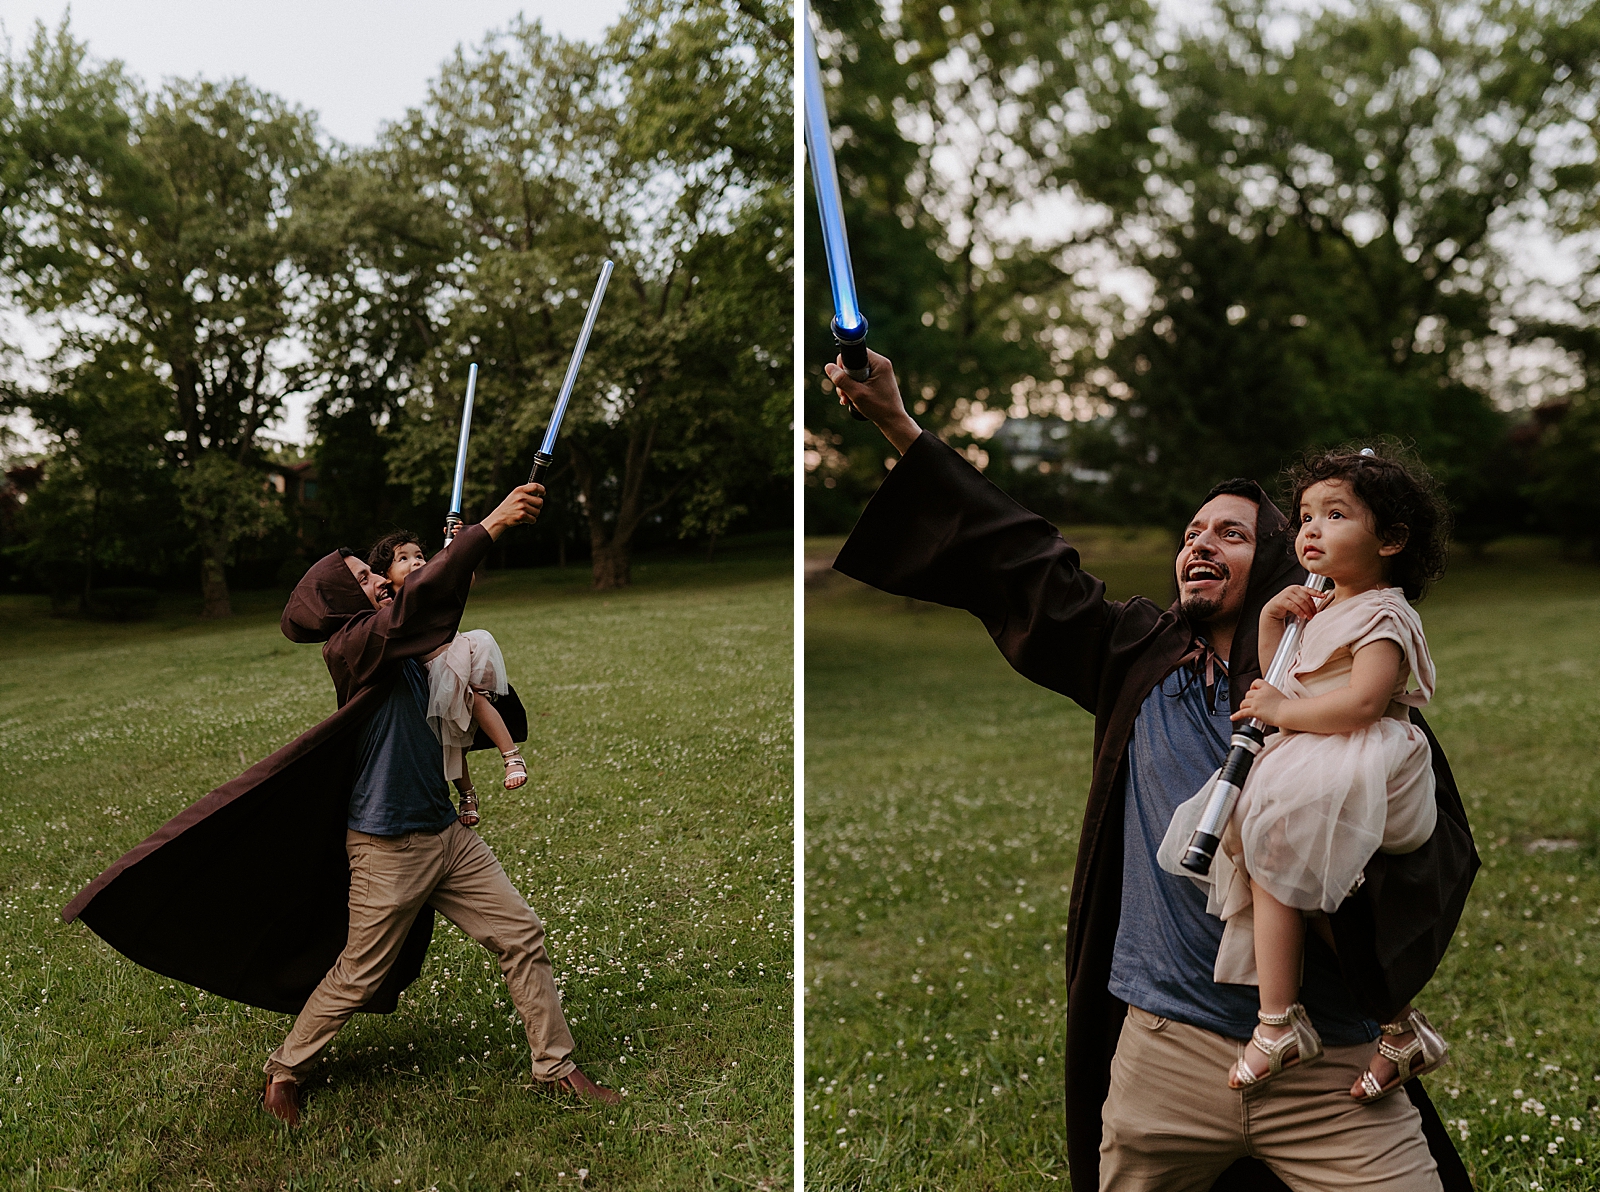 Father holding daughter with both of them holding lightsabers on grassy field